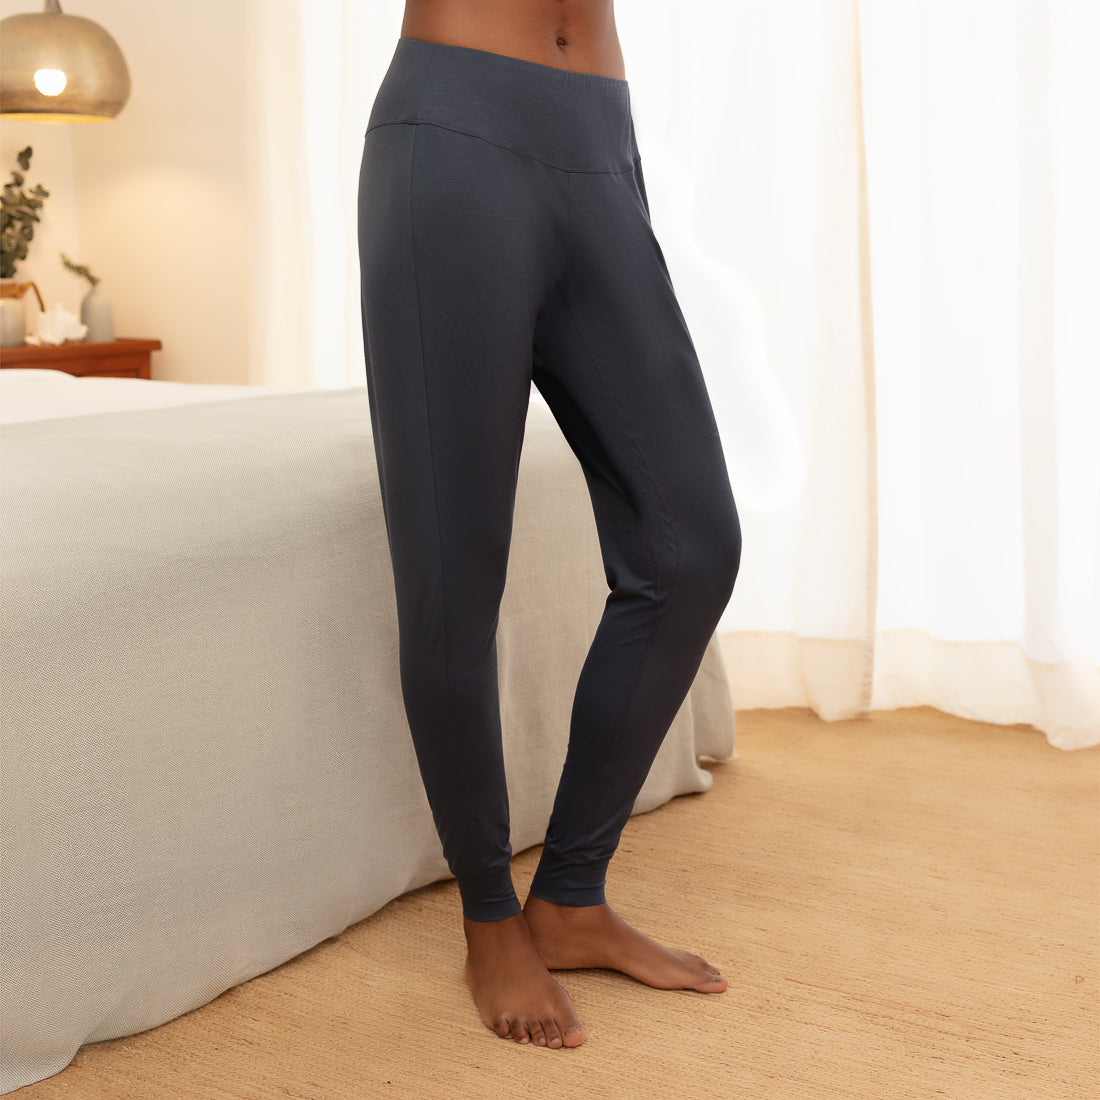 Cooling pajama pants for women